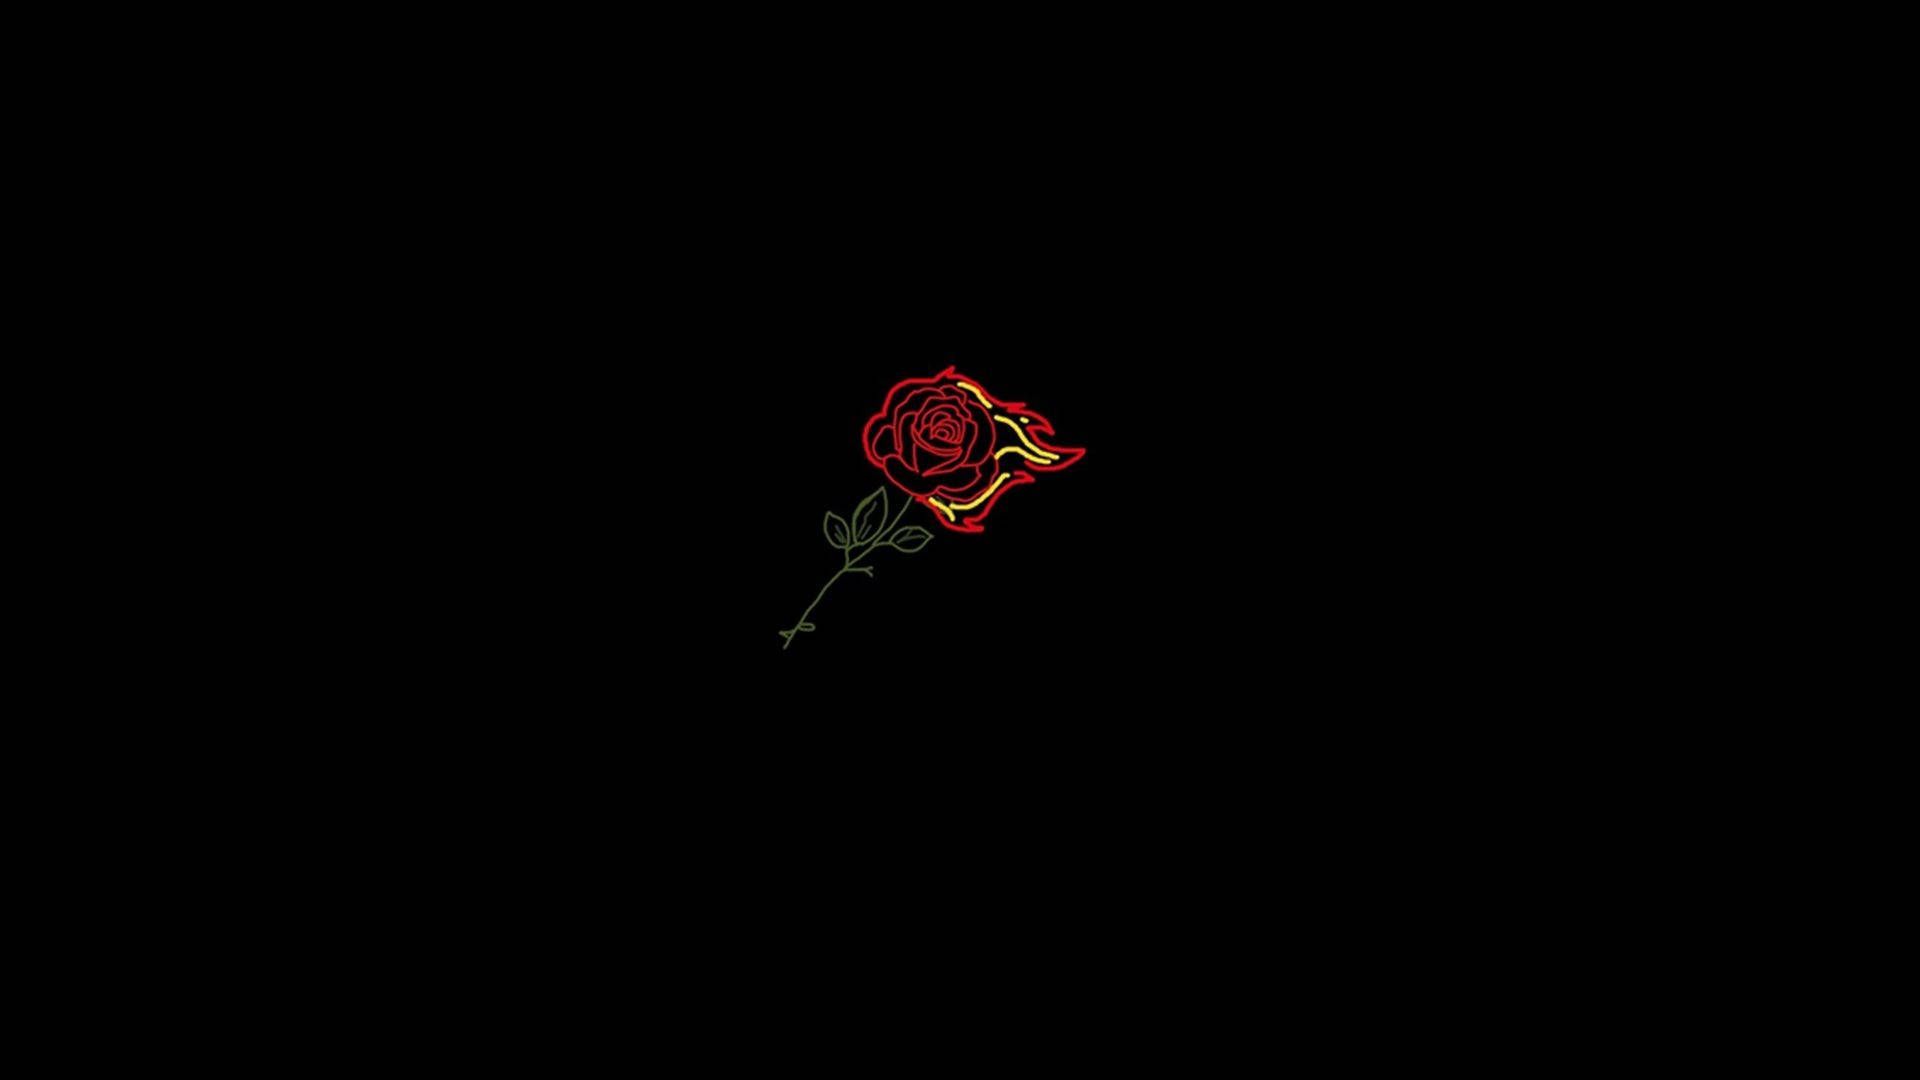 Aesthetic wallpaper red rose on a black background - Profile picture